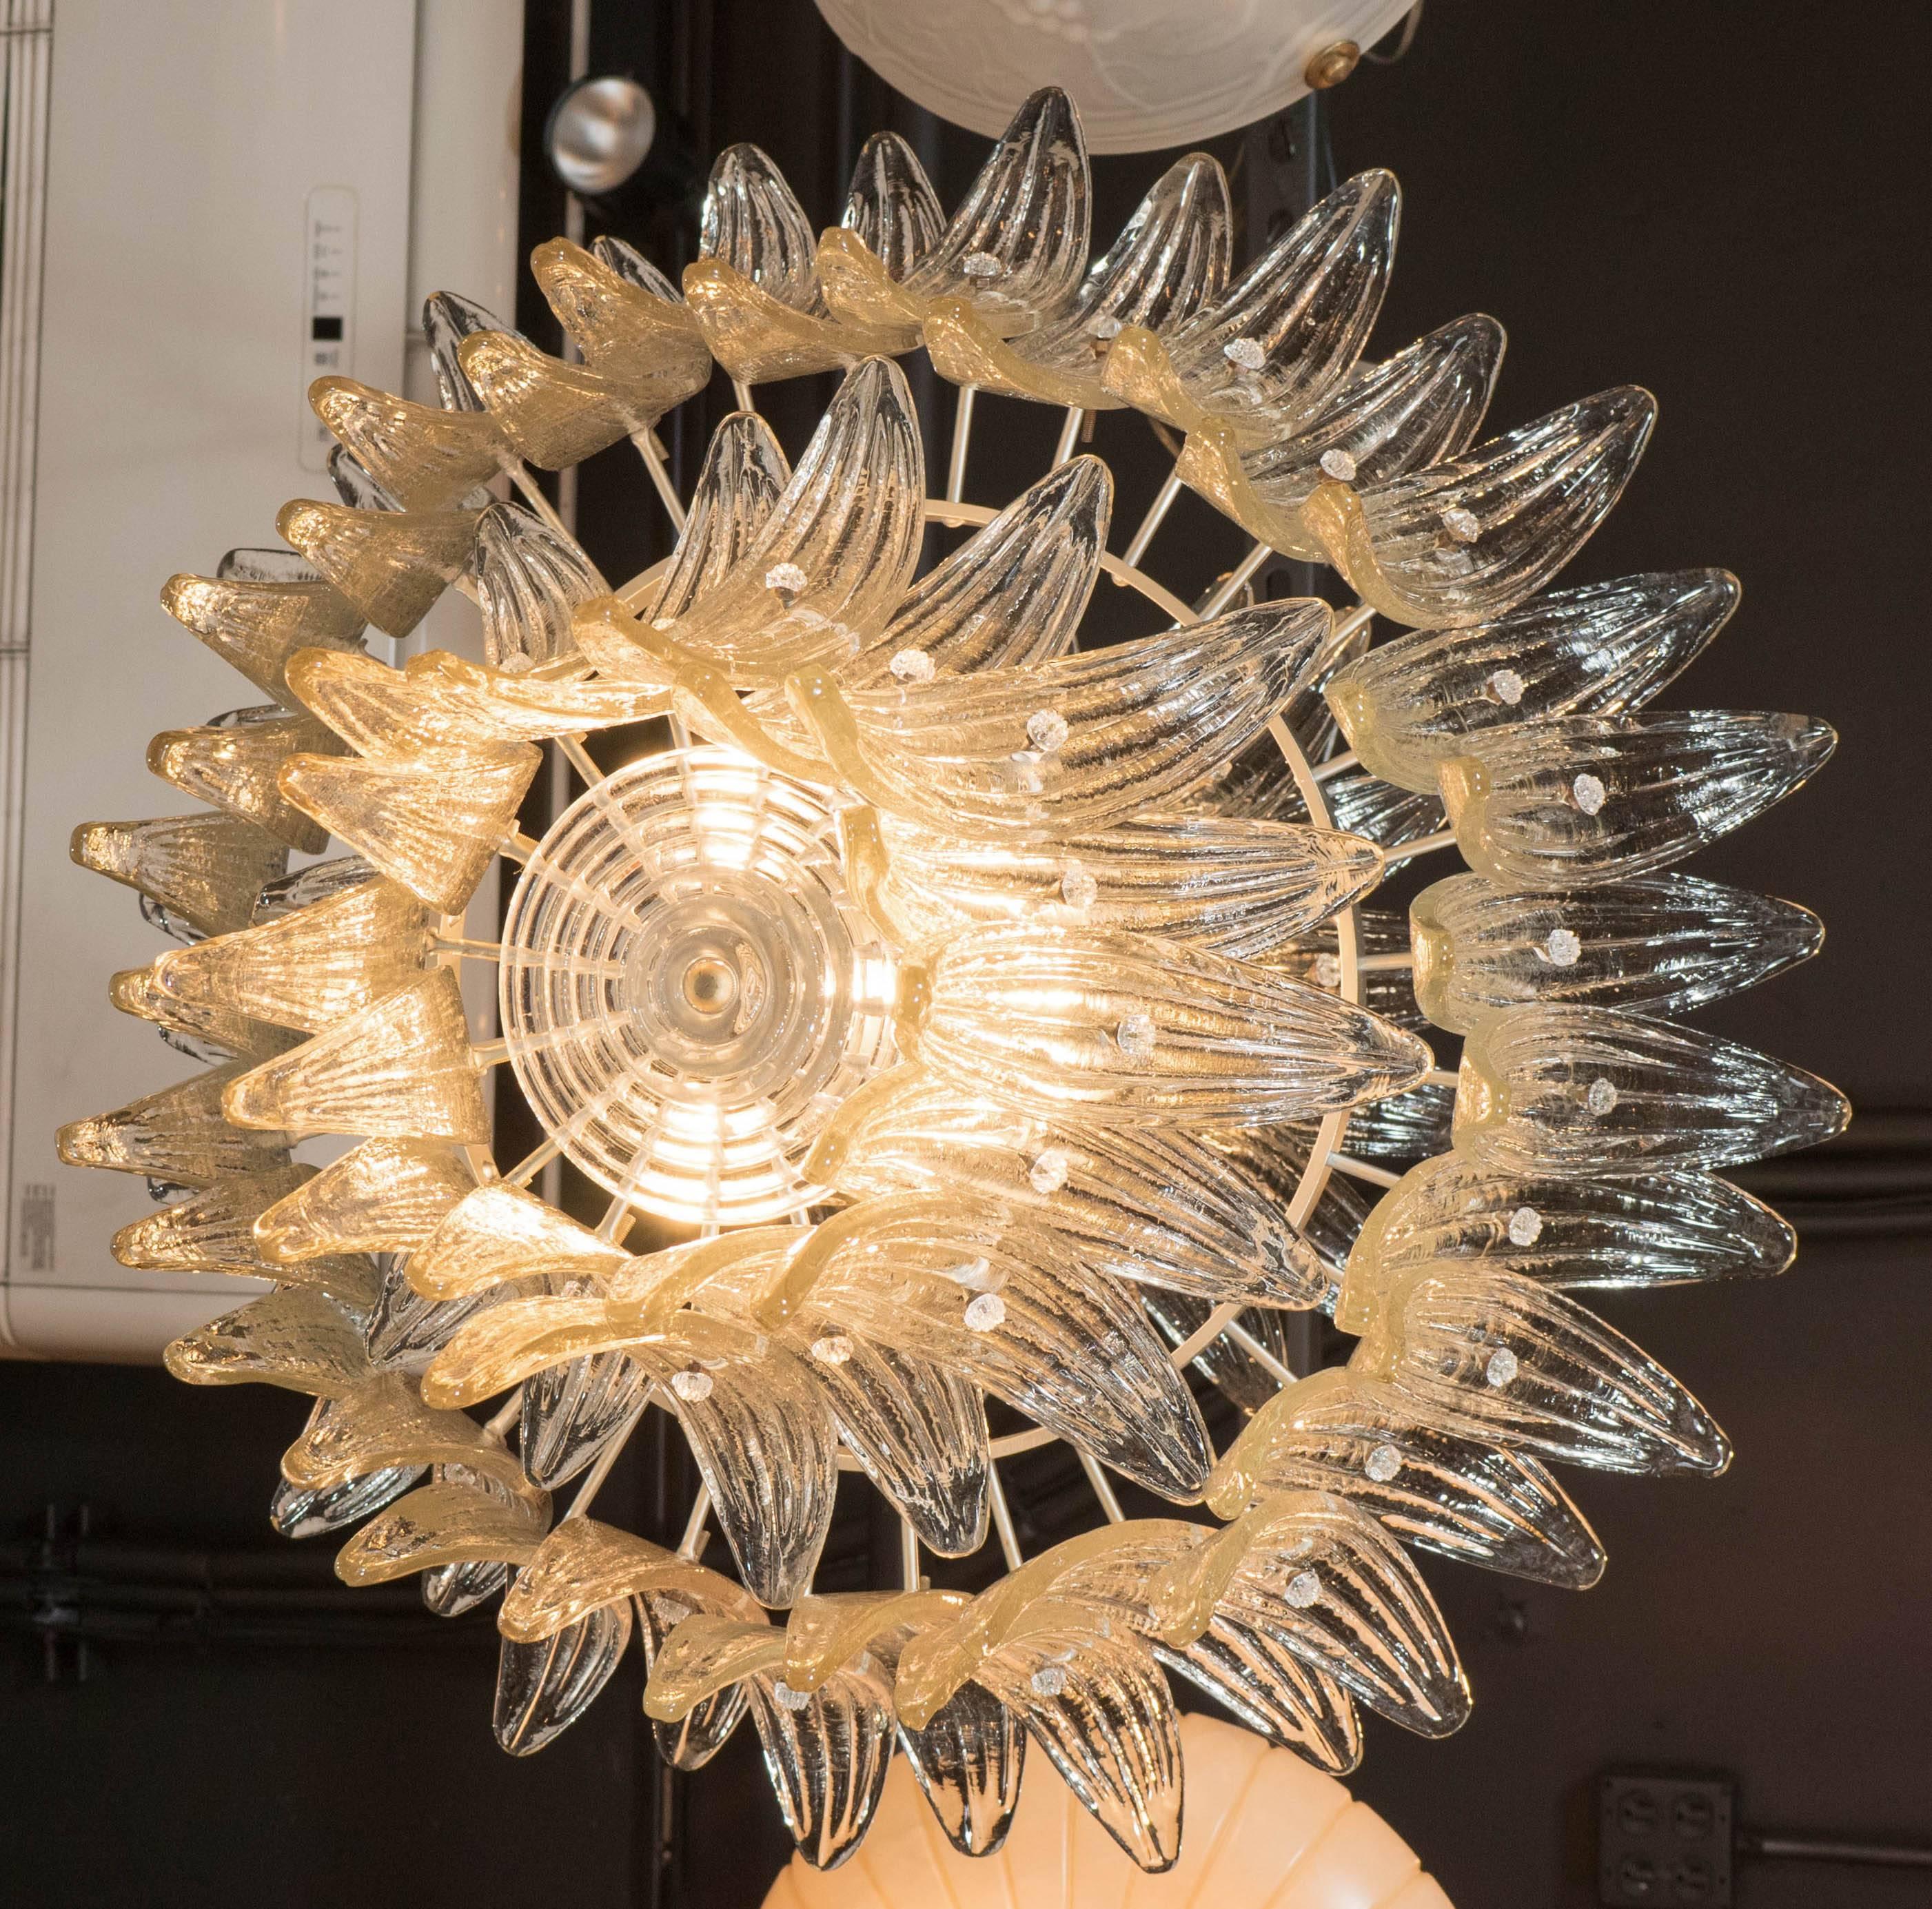 Exquisite Three-Tier Palma Chandelier in Smoked Murano Glass and Brass Fittings 1